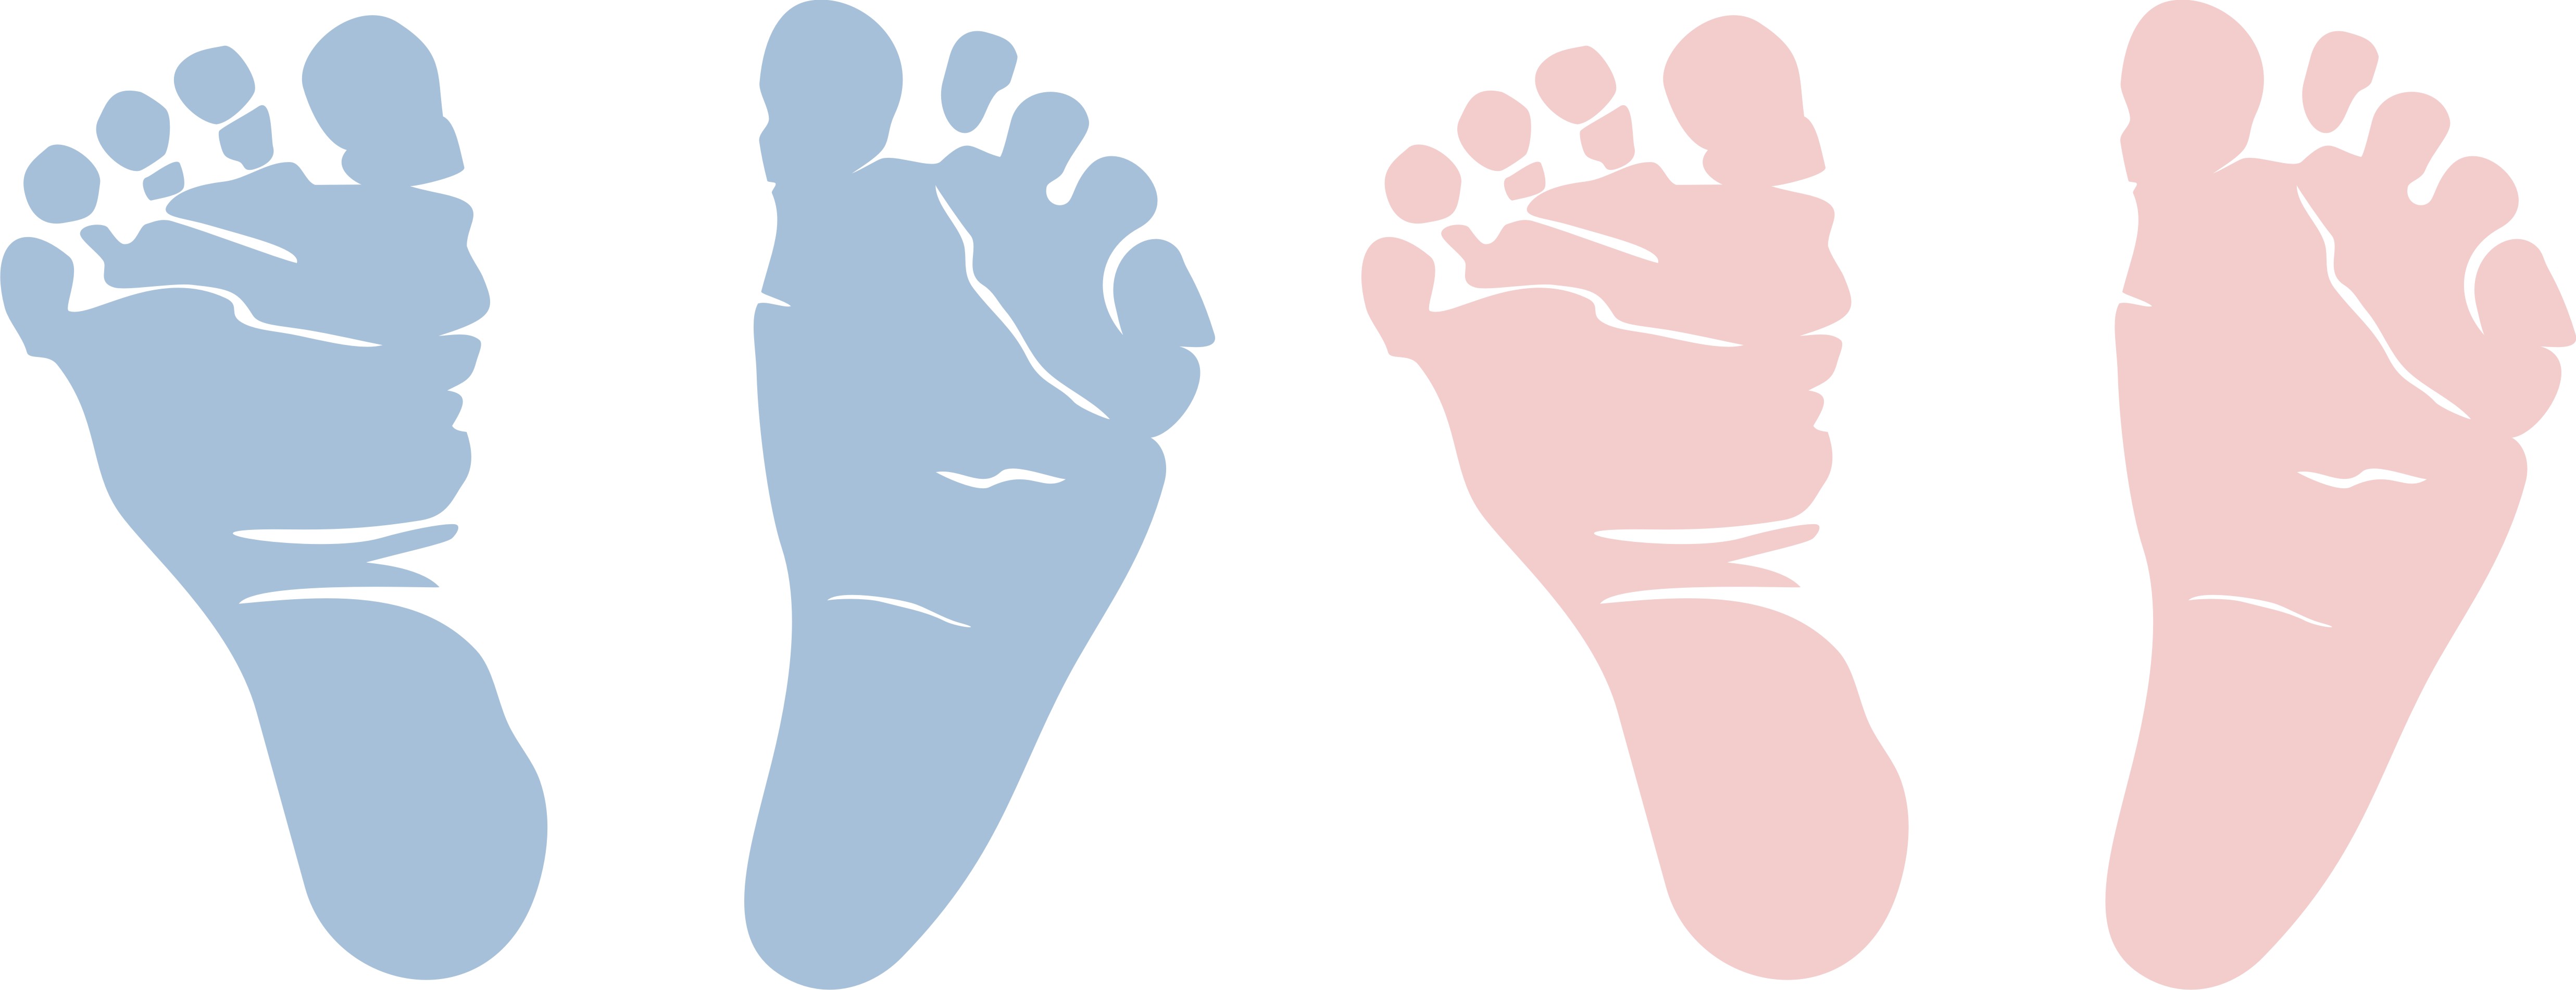 black and white baby feet clipart. baby footprints clipart.